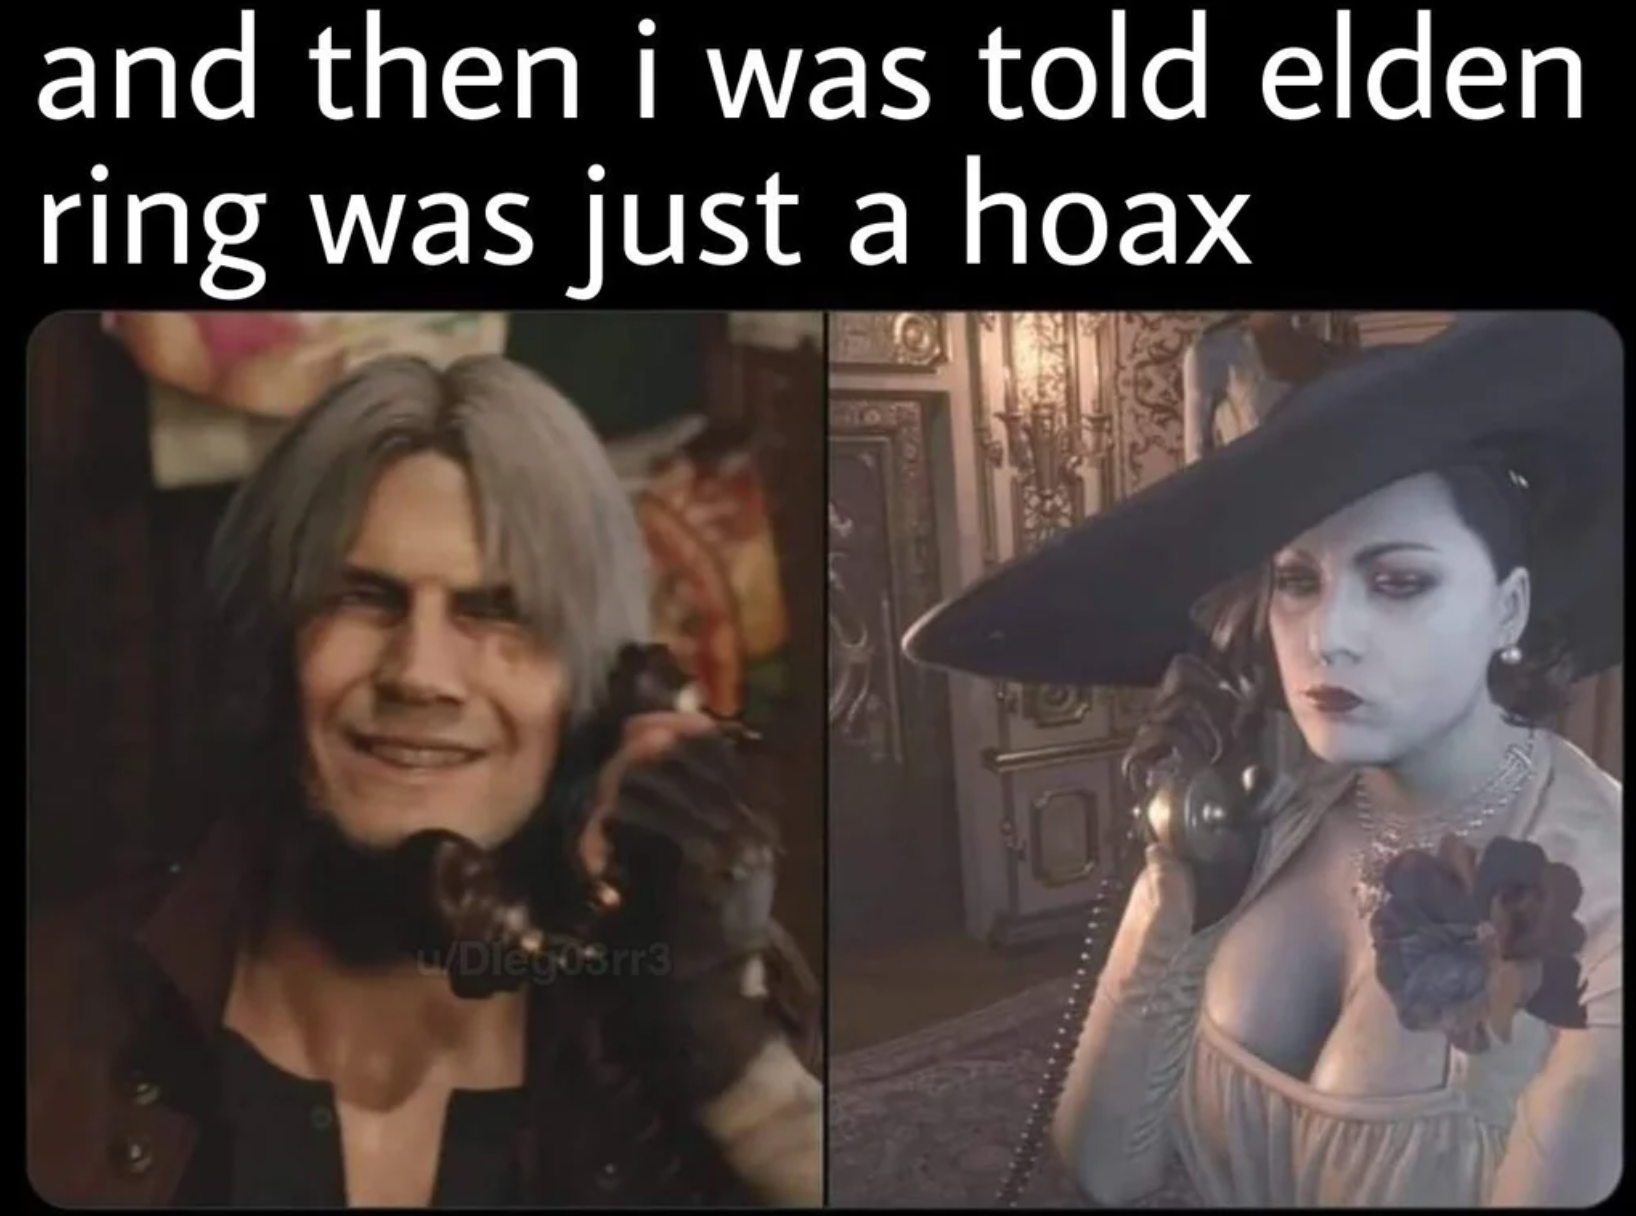 funny gaming memes - hca west florida - and then i was told elden ring was just a hoax wiedesi3